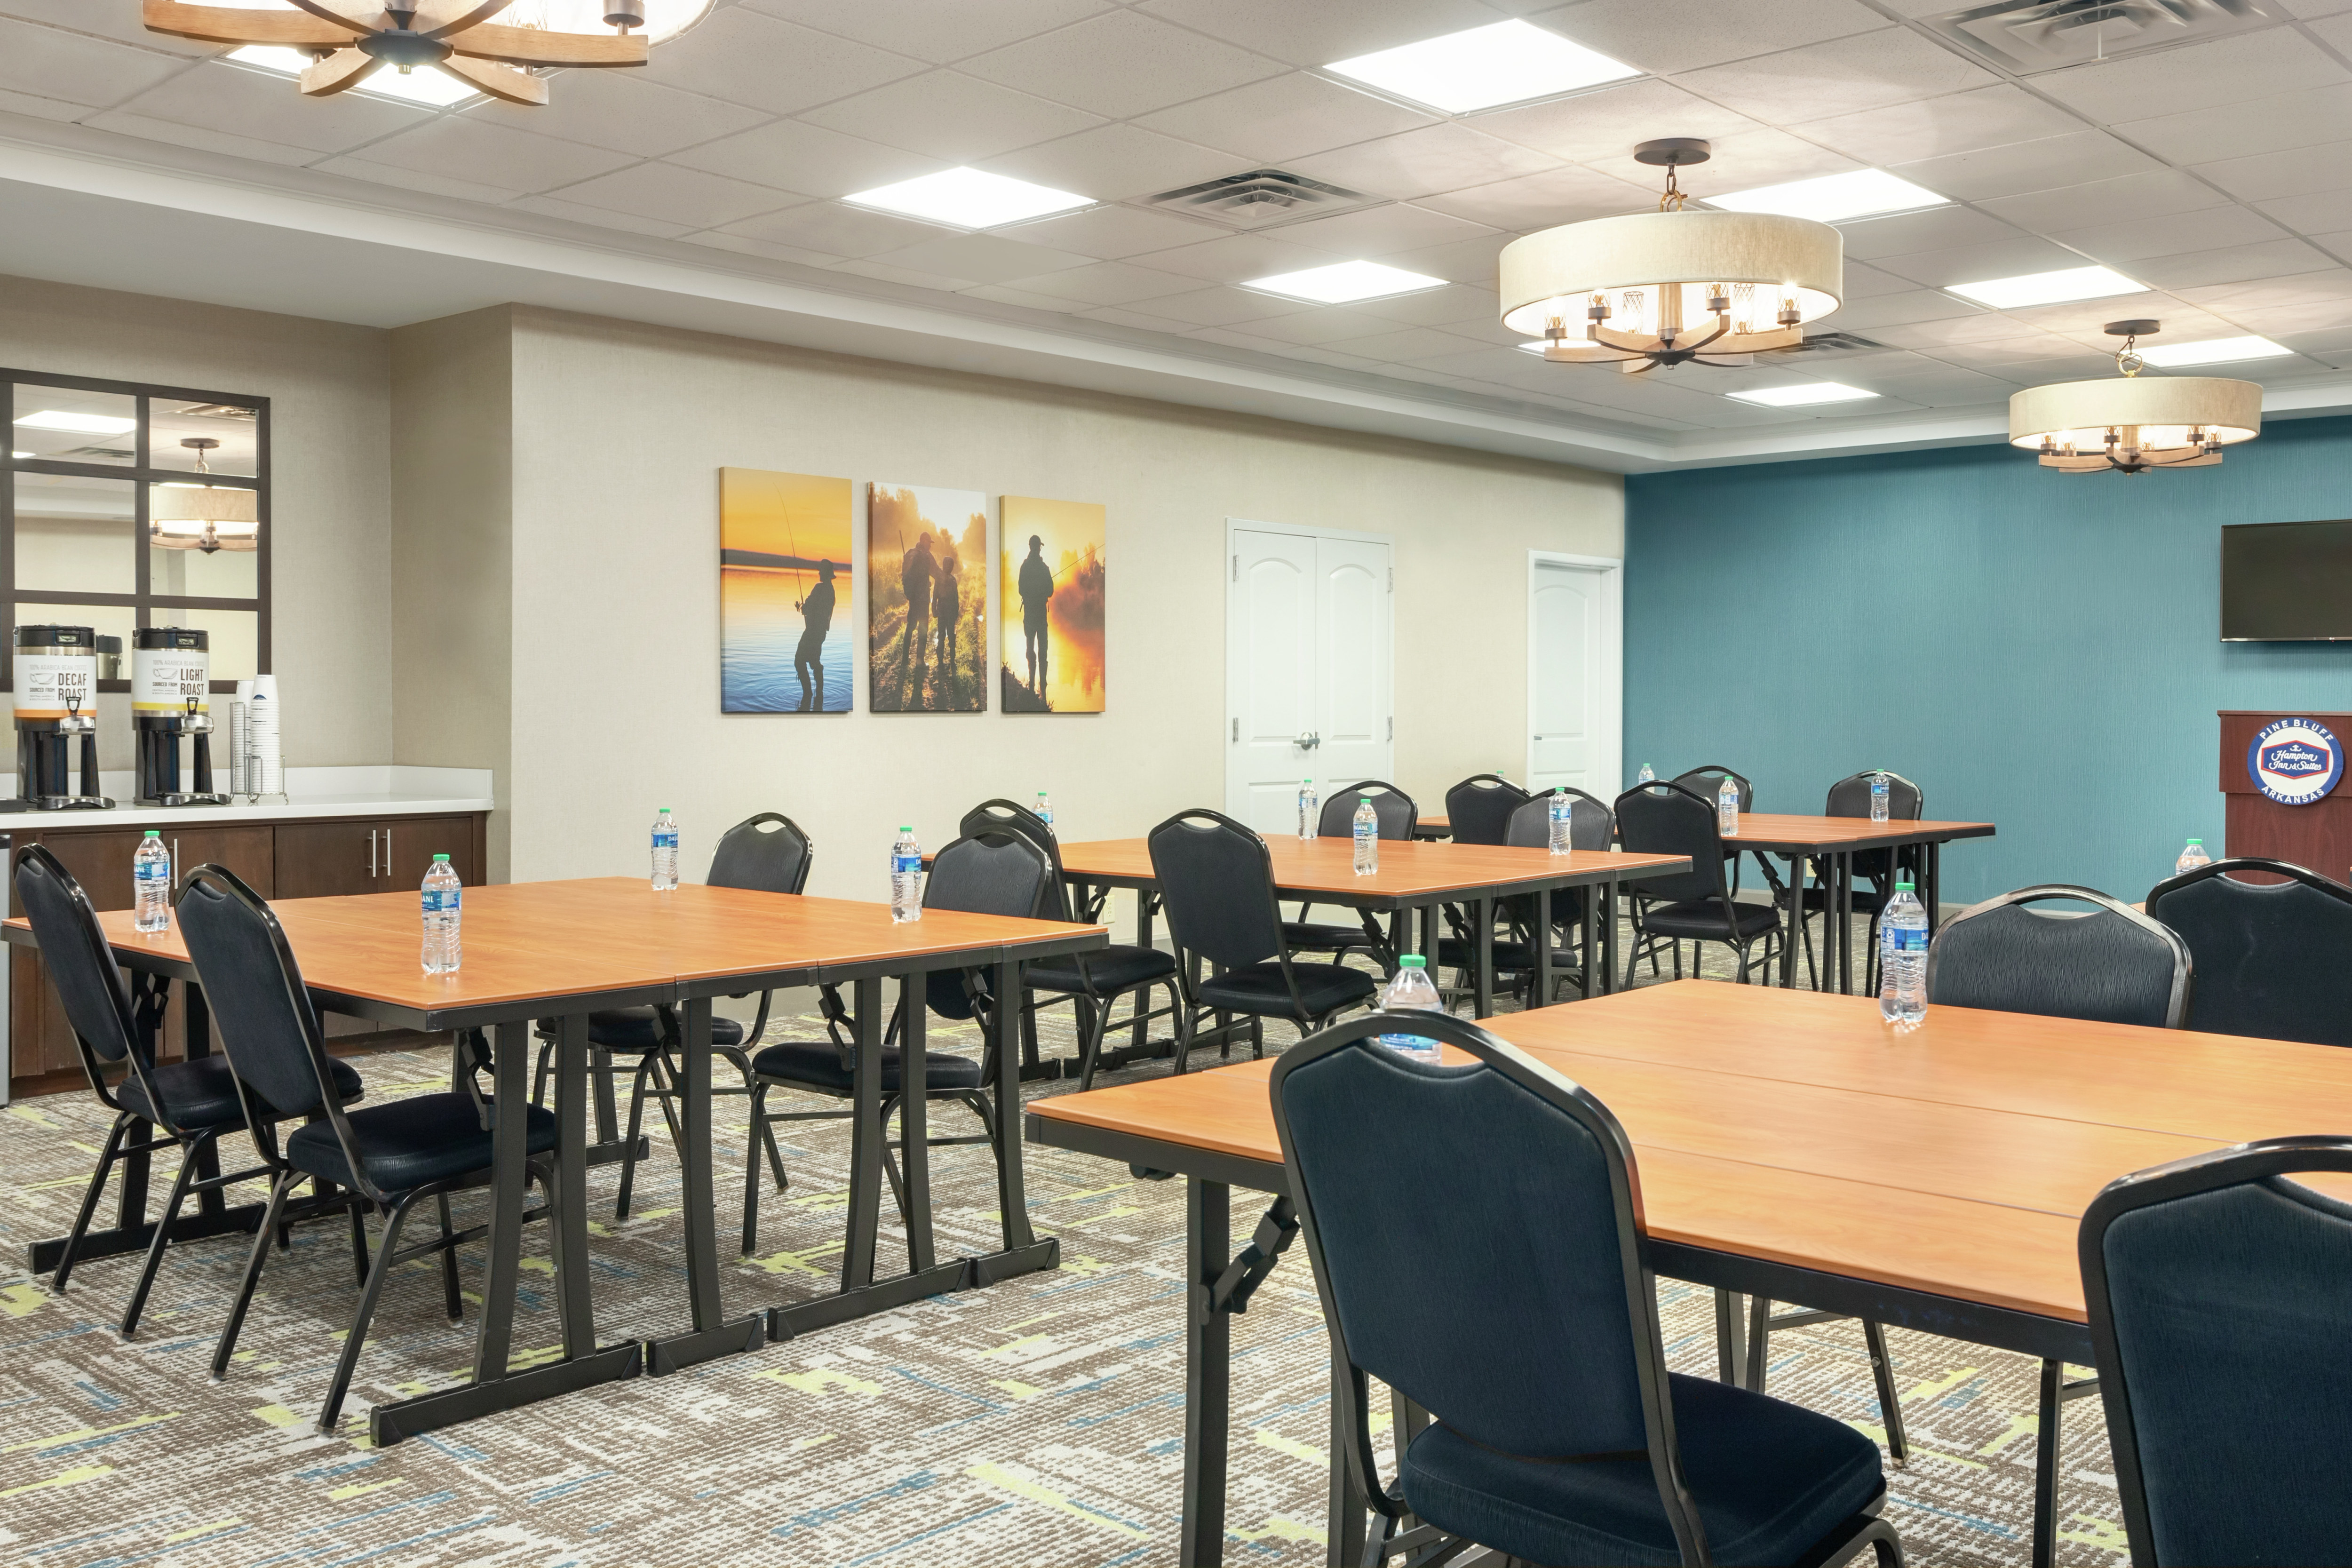 Spacious meeting space featuring large tables with ample seating for events, TV, podium, and coffee break station.